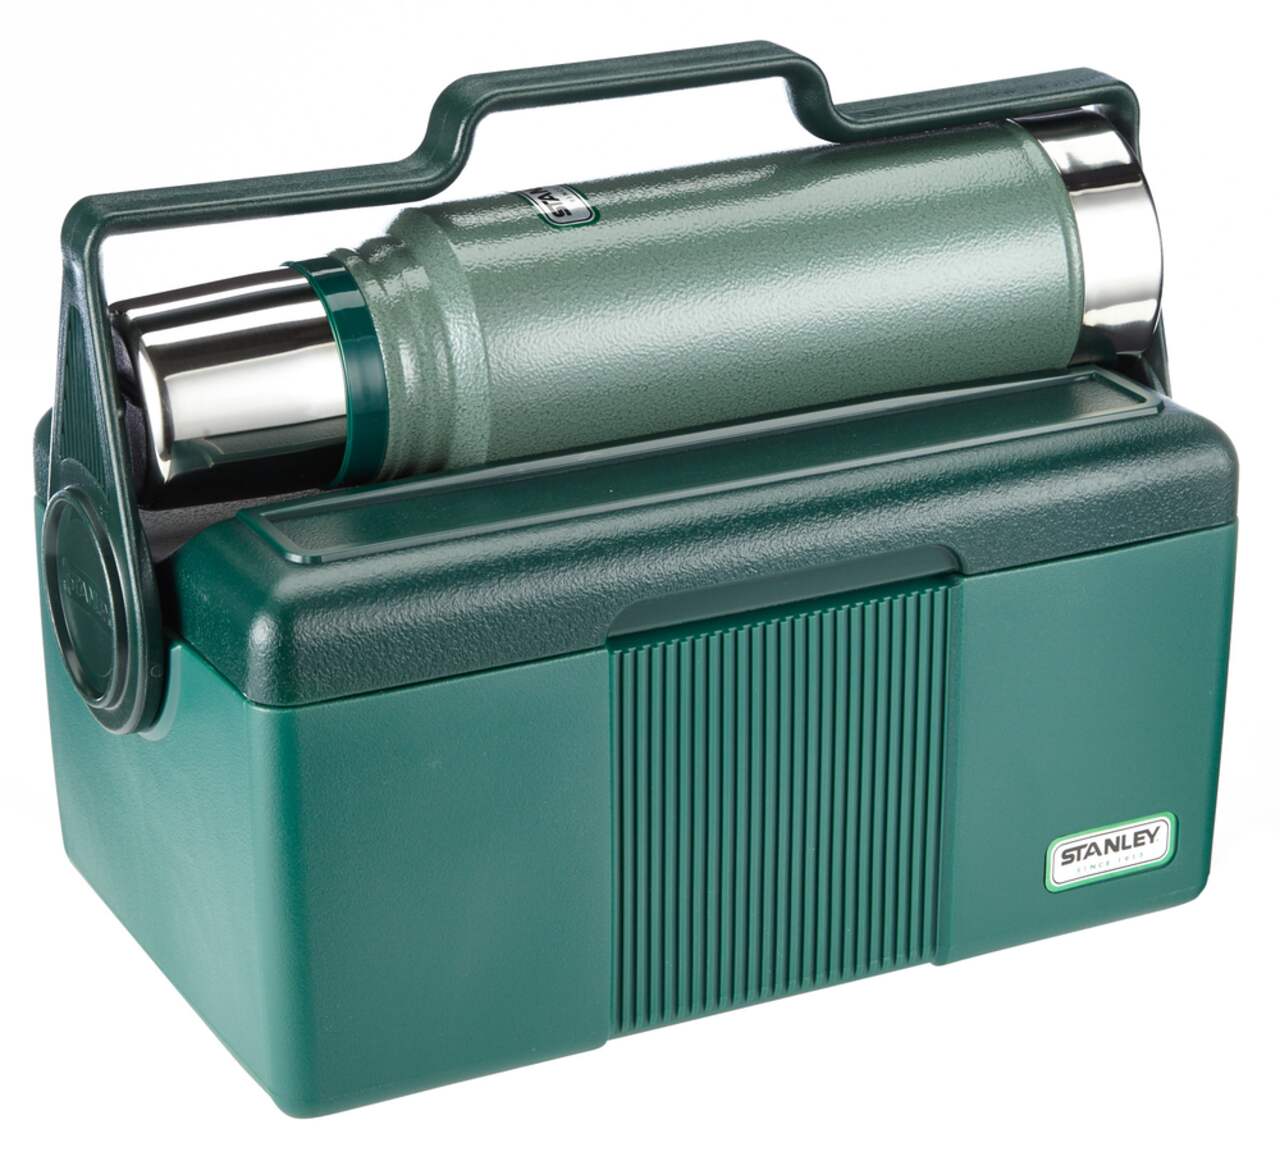 https://media-www.canadiantire.ca/product/living/kitchen/food-storage/1422181/stanley-heritage-cooler-with-thermos-26545c8e-2a7d-46ba-be98-cb5facfb1e95.png?imdensity=1&imwidth=640&impolicy=mZoom